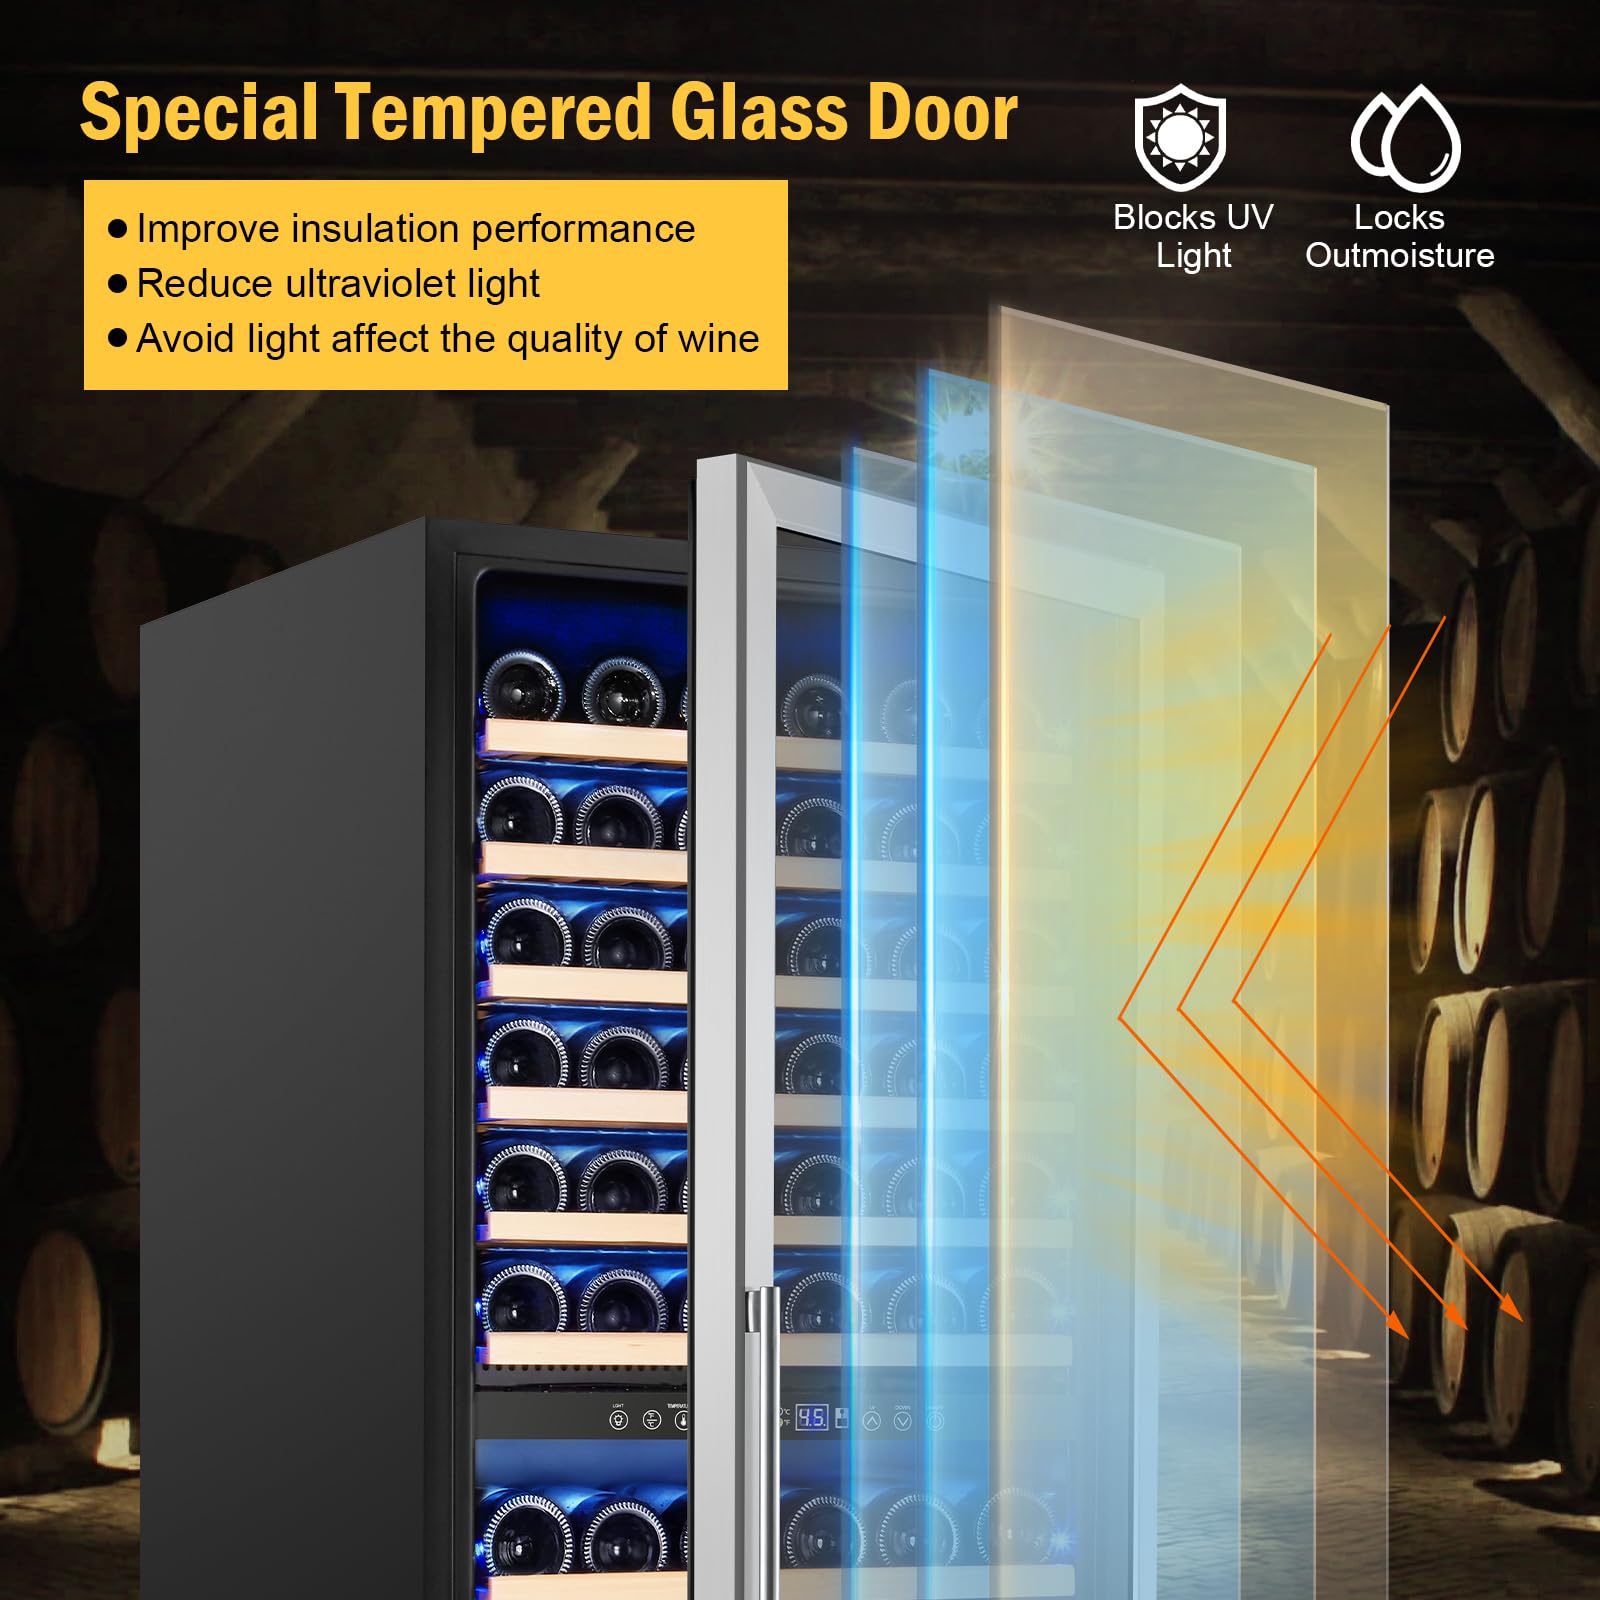 FoMup 30 Inch Wine and Beverage Refrigerator and 24 Inch Wine Cooler Dual Zone 180 Bottles Bundle